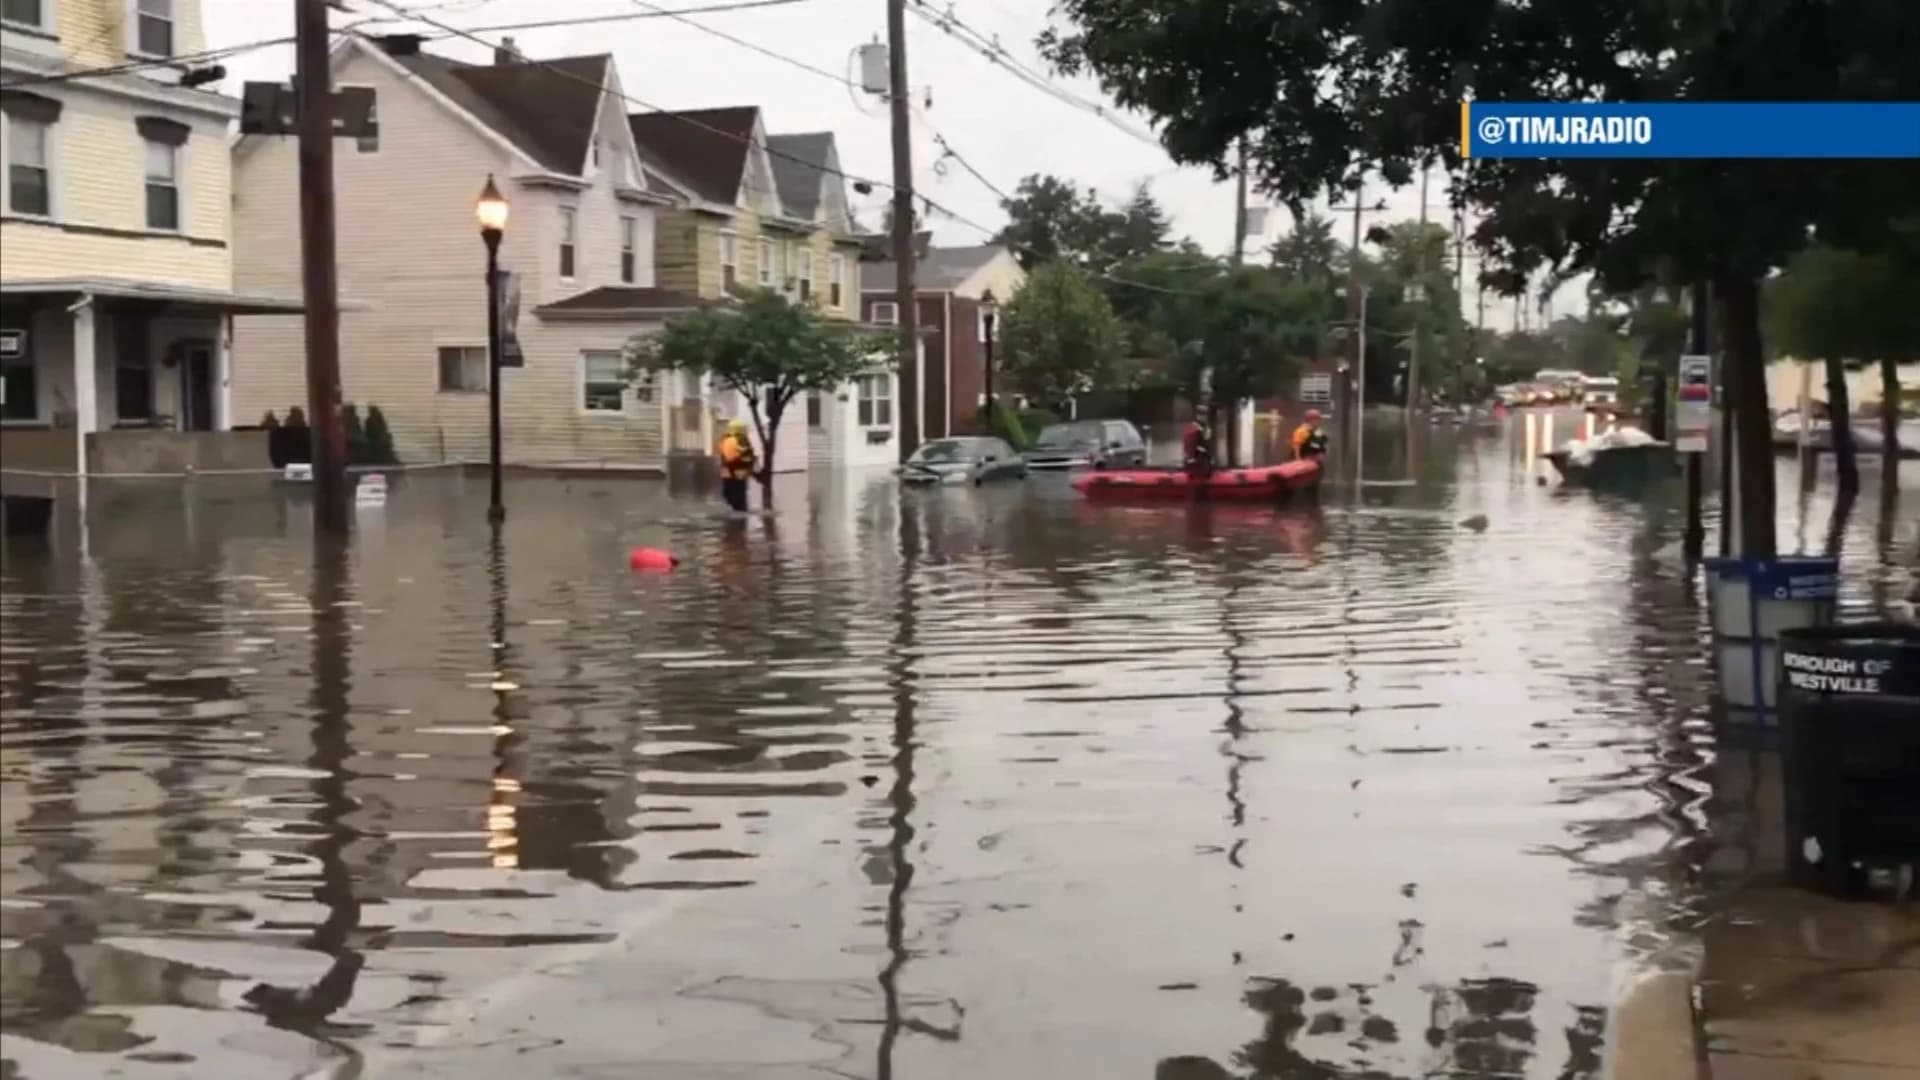 Meteorologist: ‘NJ township saw a month’s worth of rain in just a few hours’